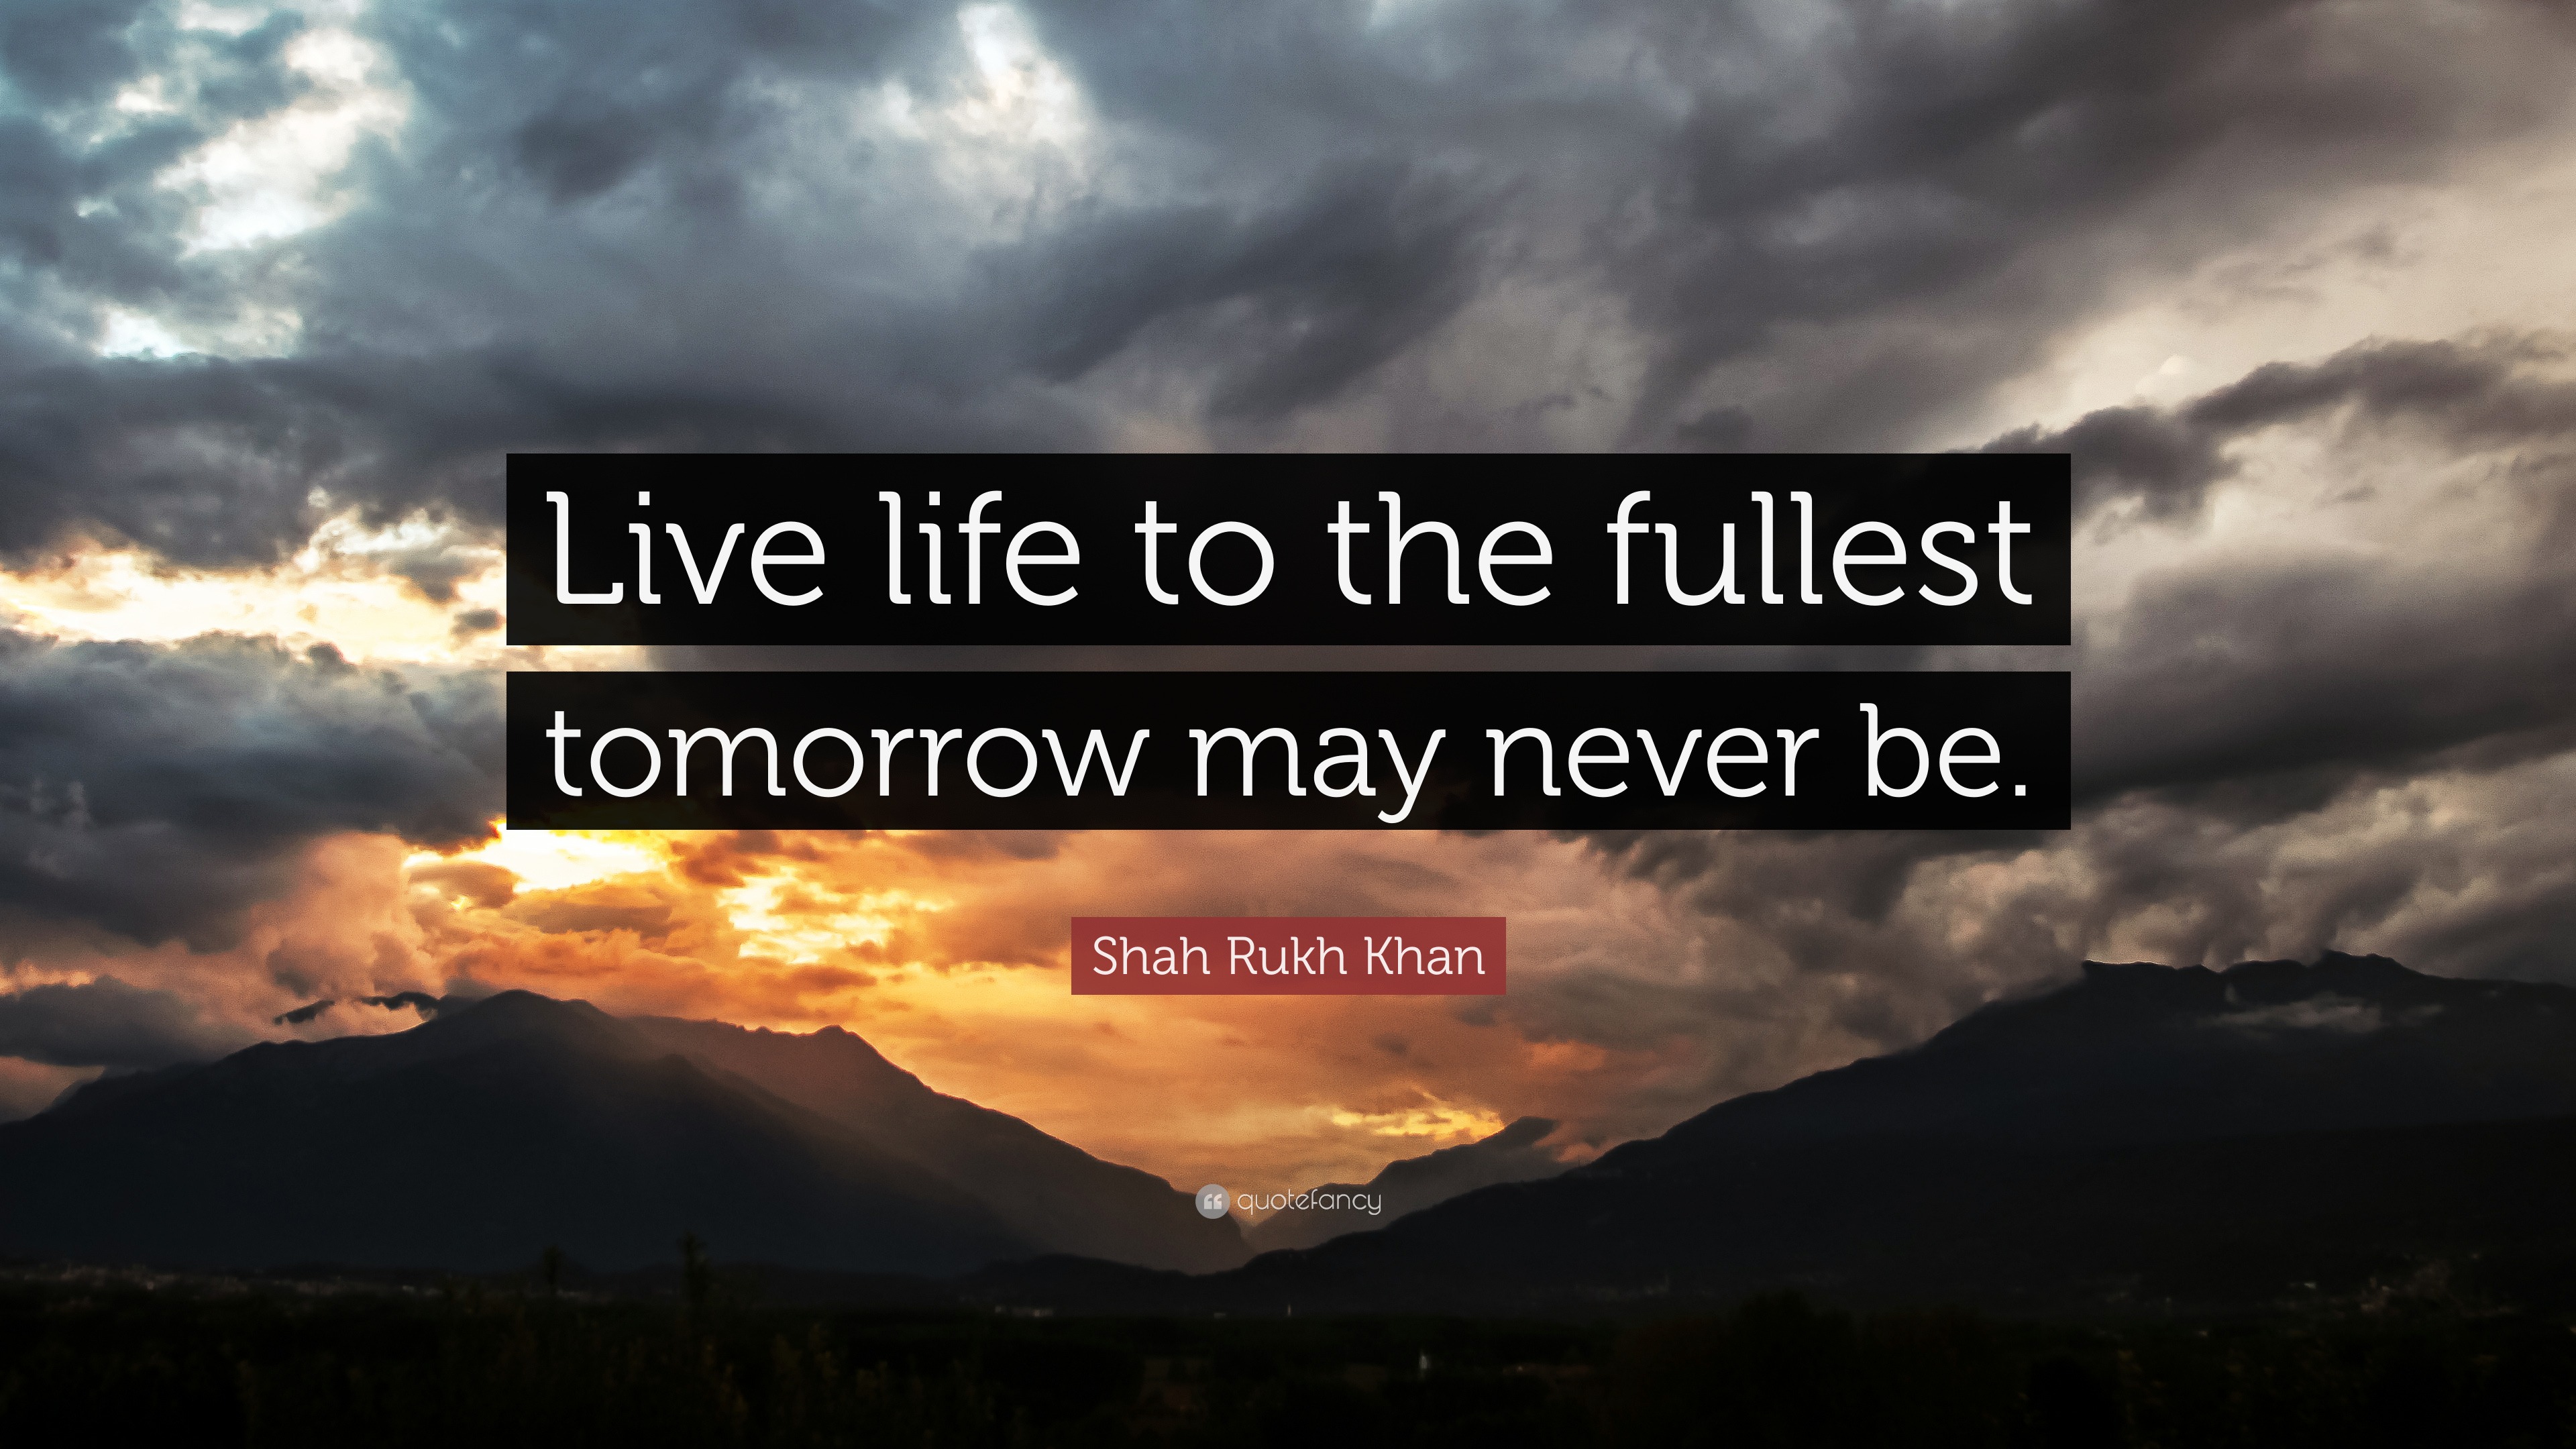 Shah Rukh Khan Quote “live Life To The Fullest Tomorrow May Never Be”